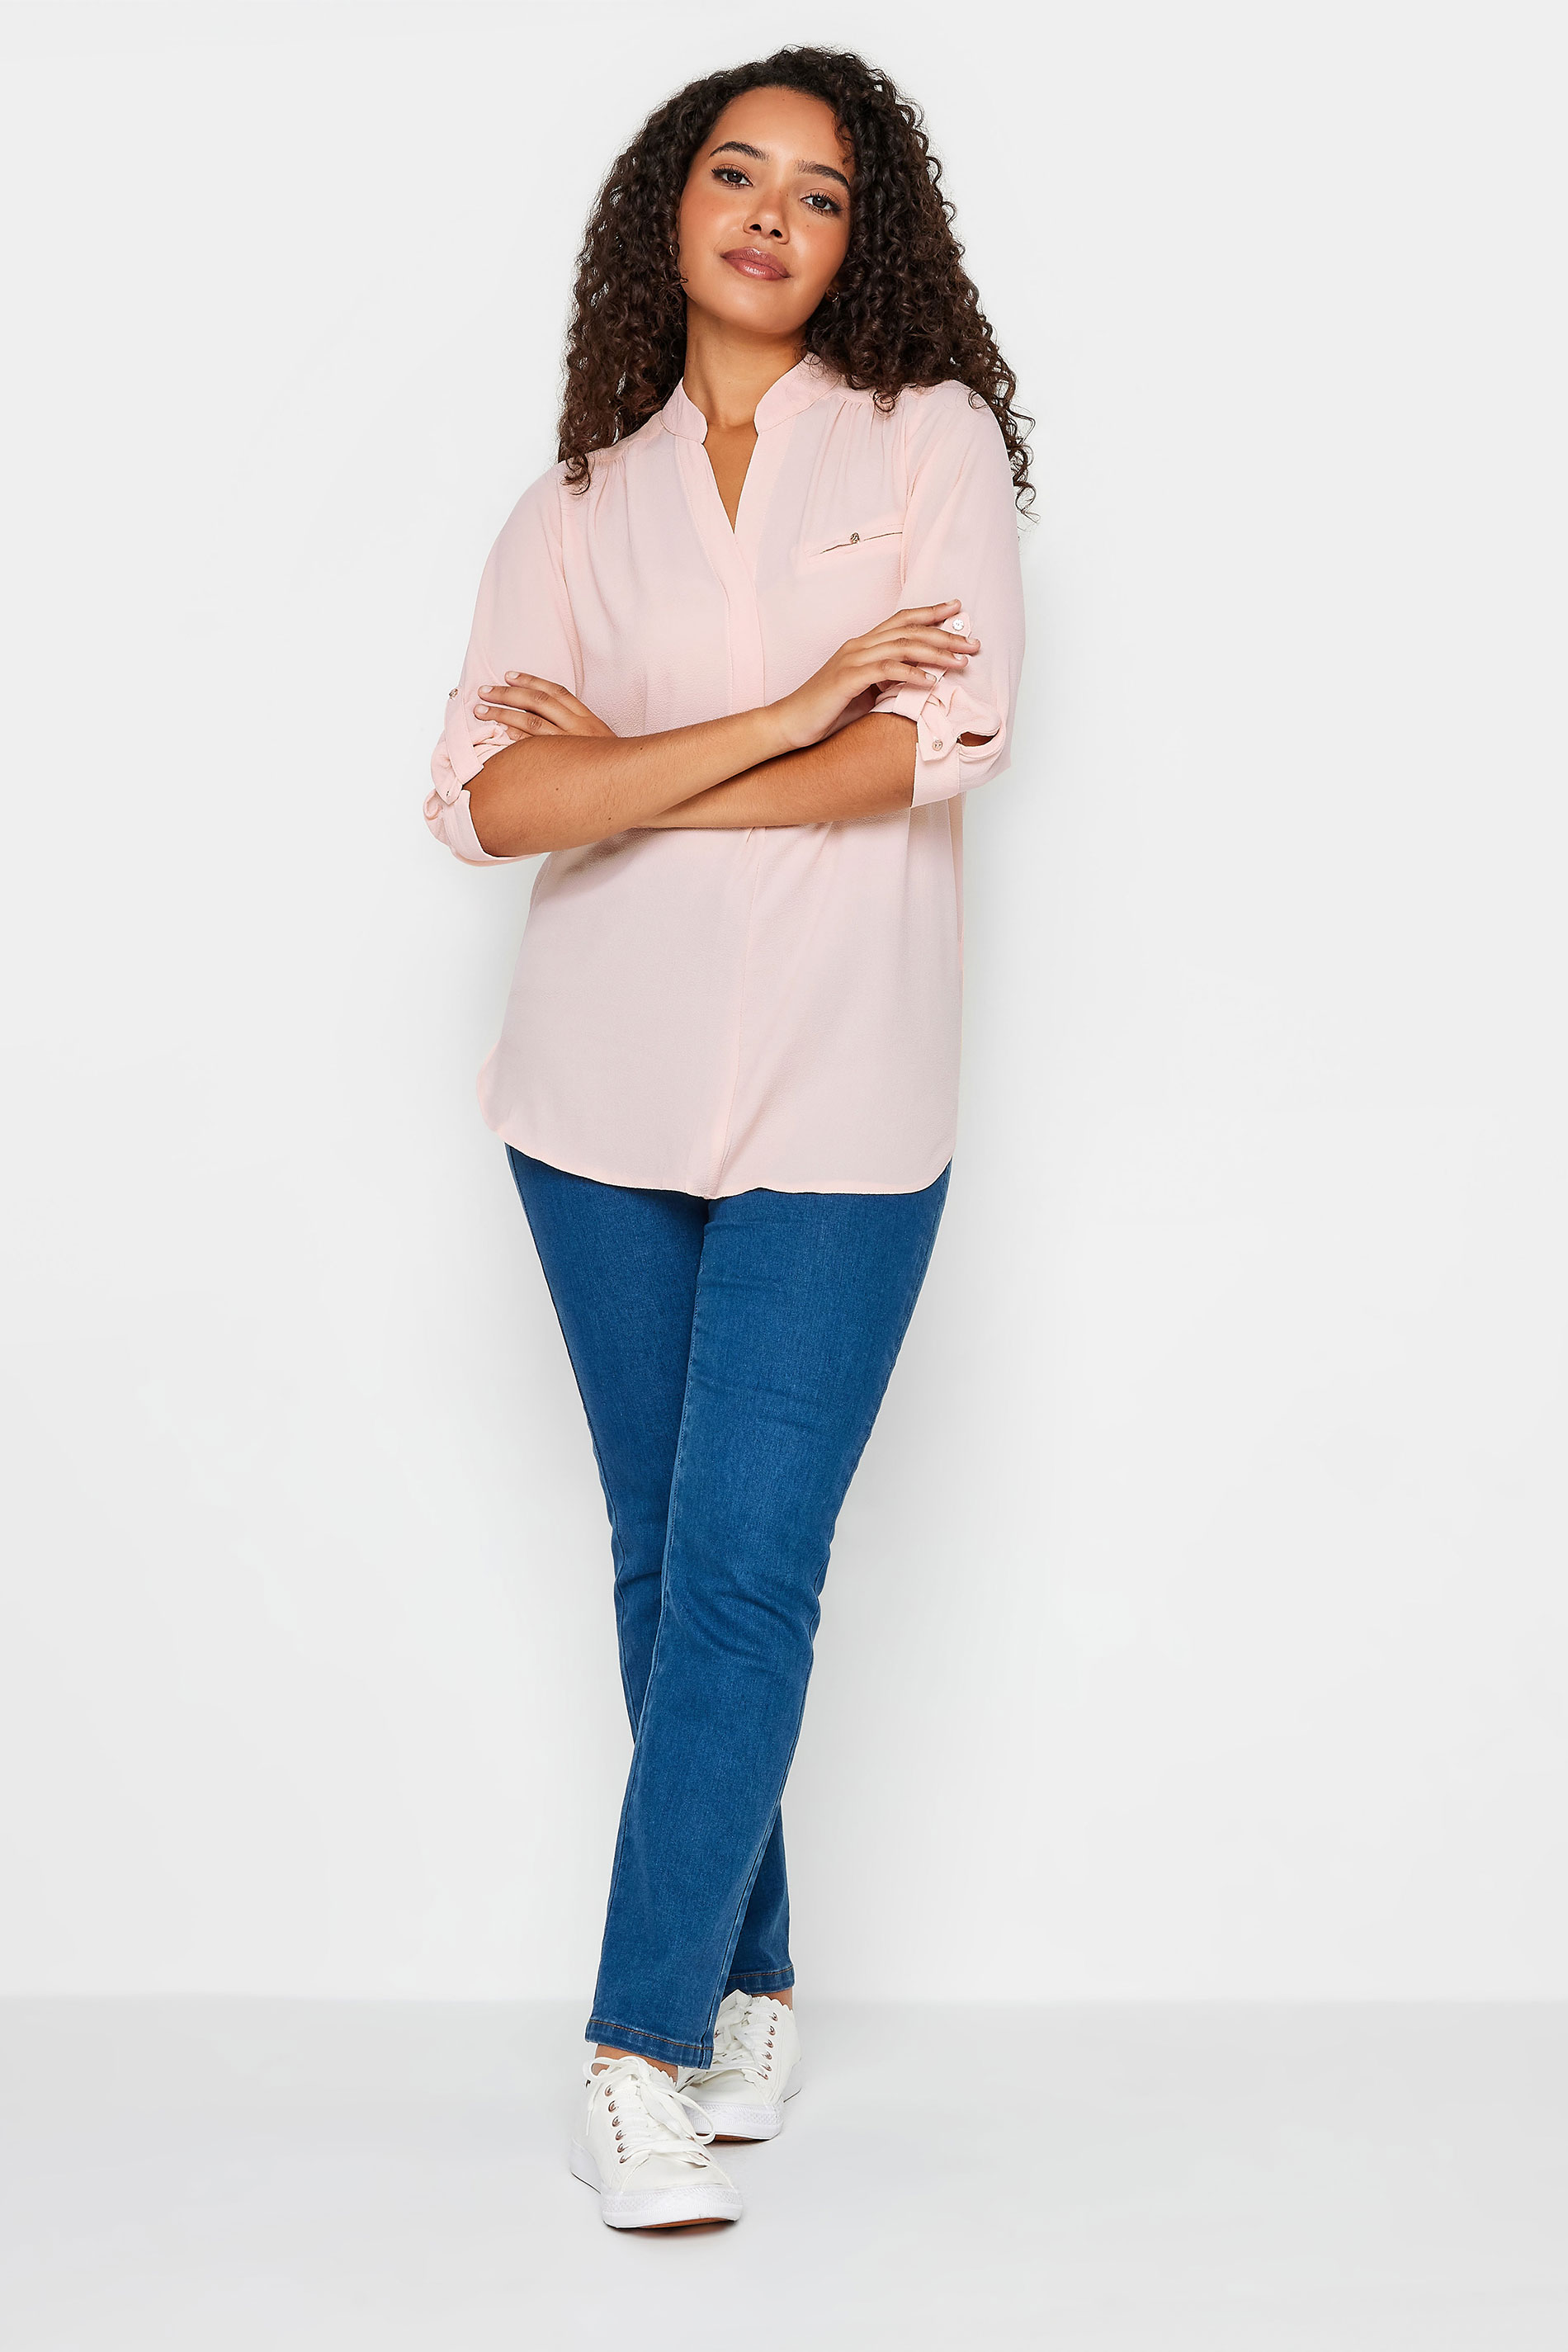 M&Co Light Pink Tab Sleeve Blouse | M&Co 3